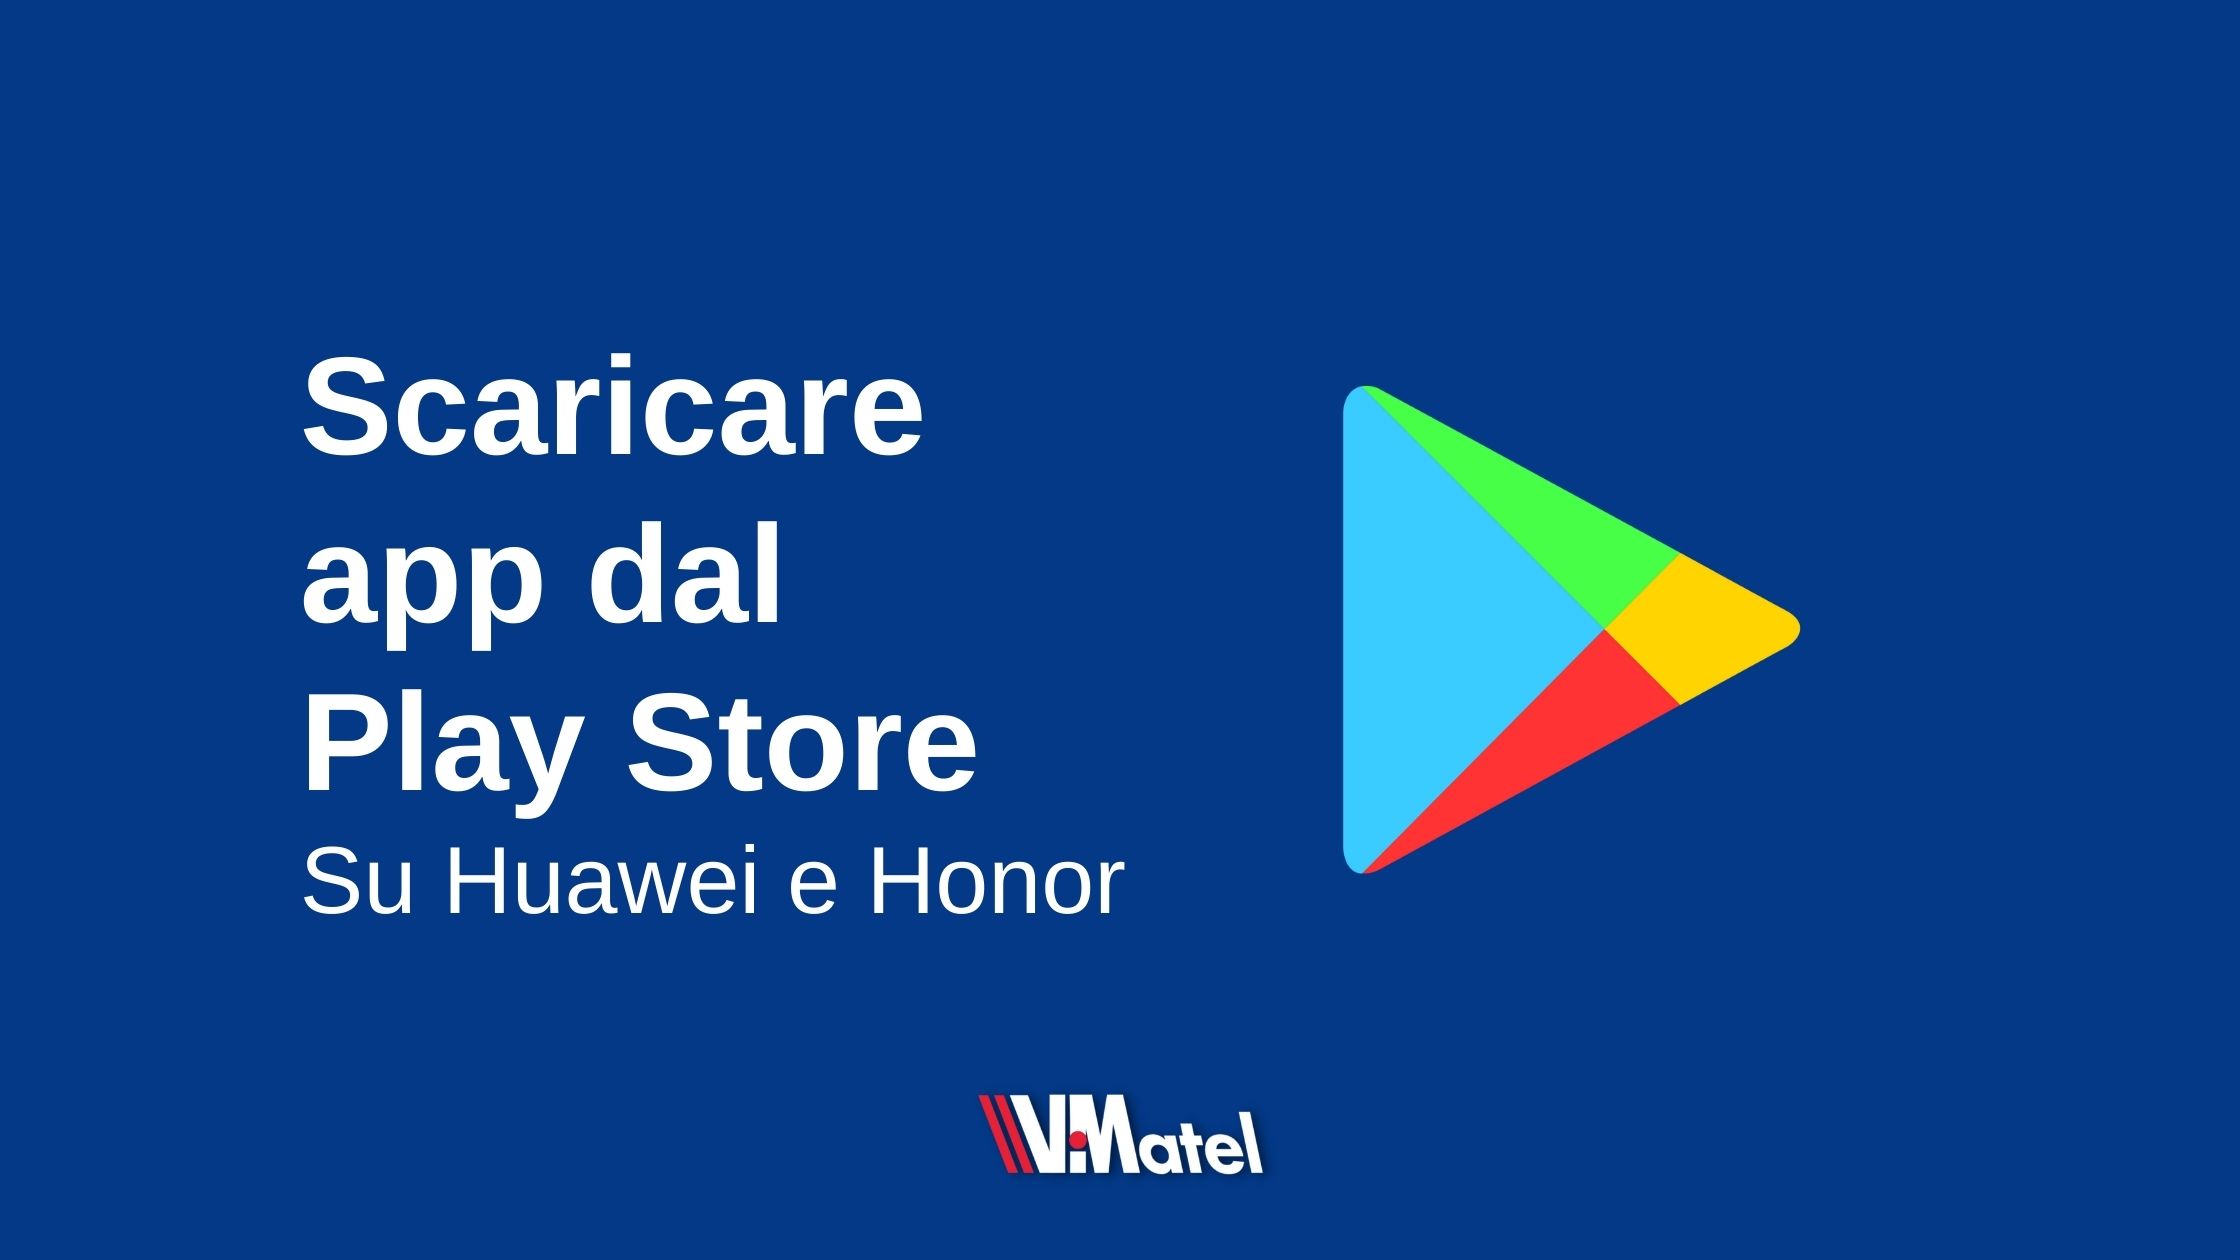 How to download apps from the Play Store on your Huawei or Honor smartphone